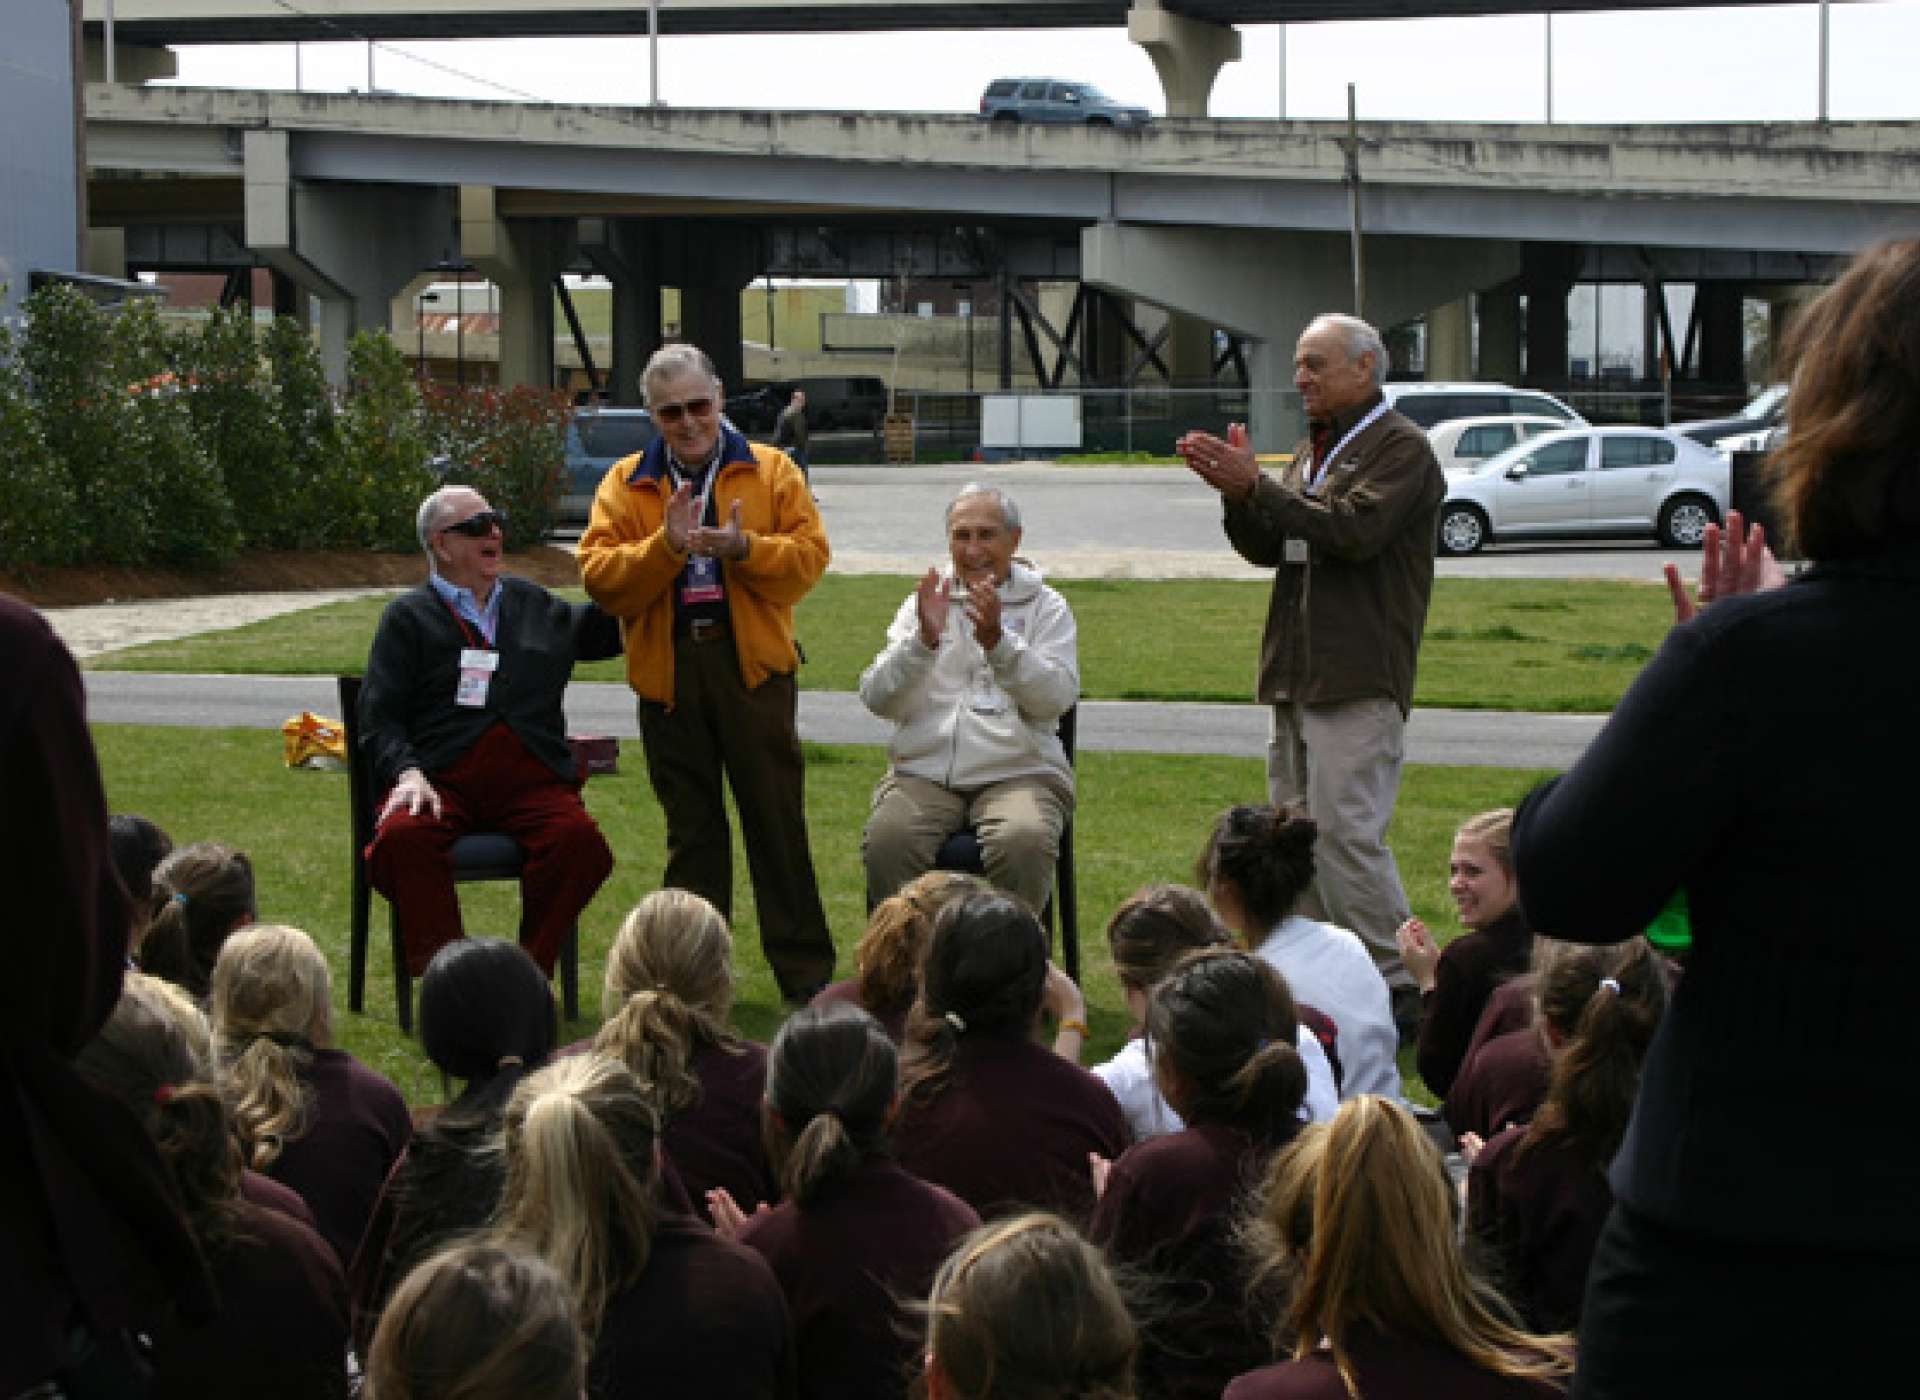 Vernon Main (second from left) and members of the “A-Team” visit with an appreciative school group on the Museum grounds.